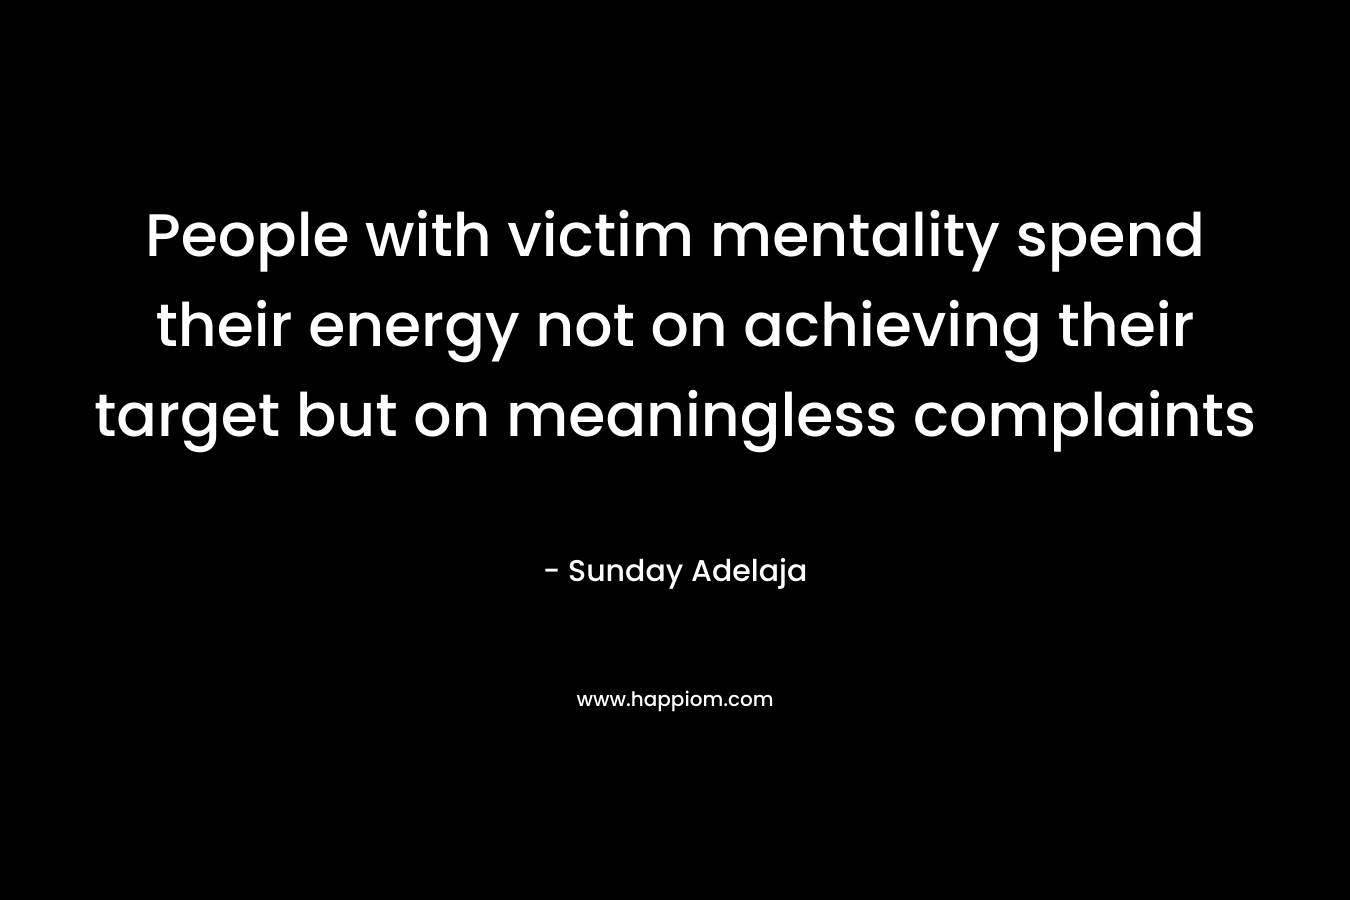 People with victim mentality spend their energy not on achieving their target but on meaningless complaints – Sunday Adelaja